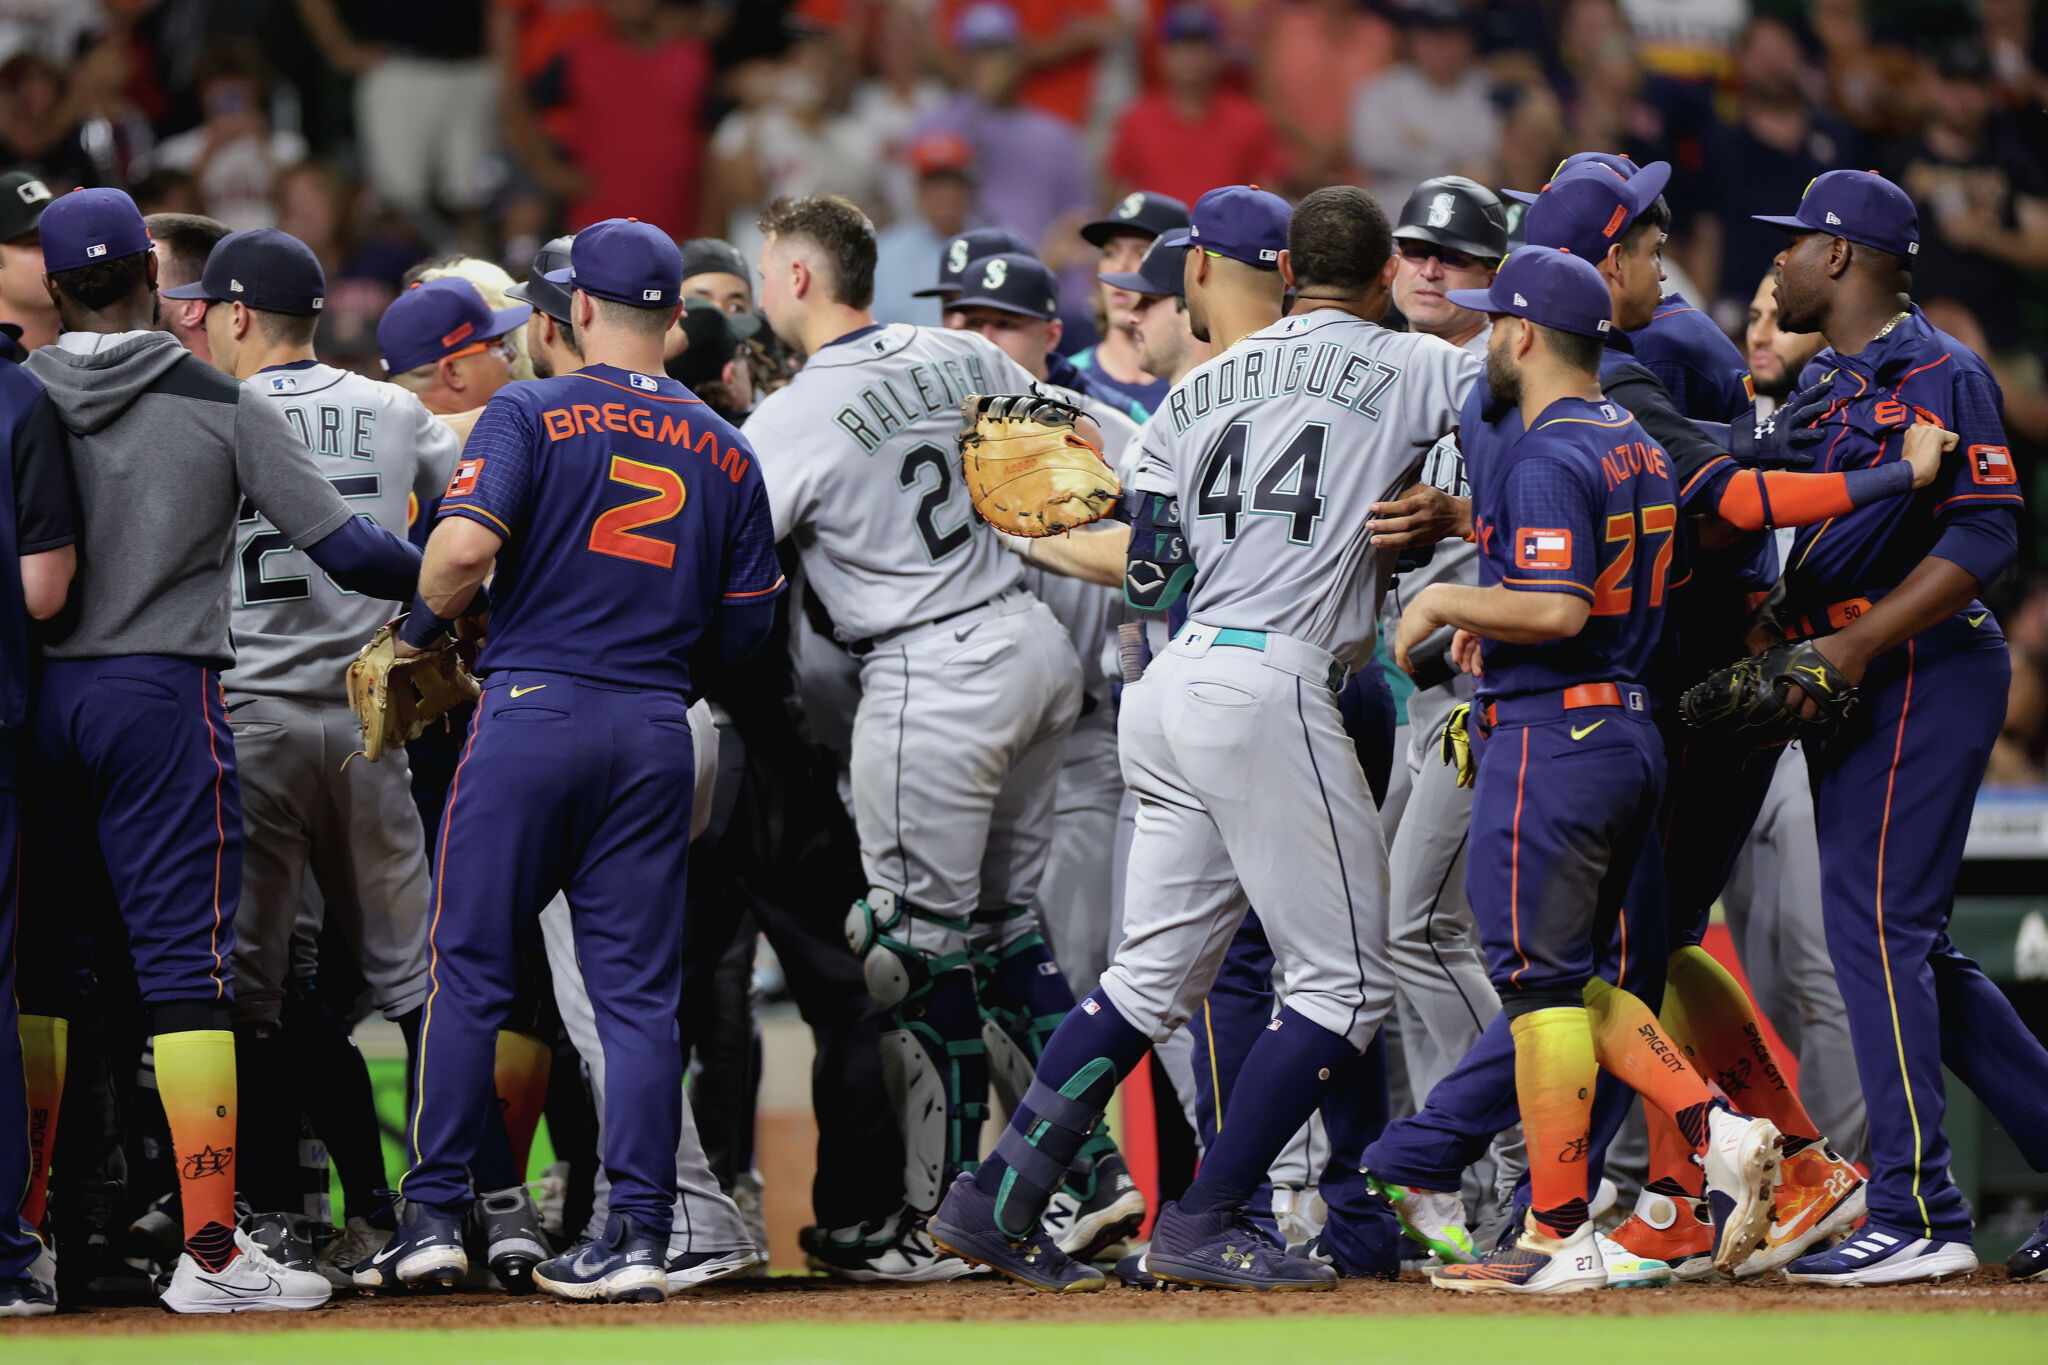 Mariners defeat Astros, Minute Maid Park, old behavior patterns, magical  thinking itself - Lookout Landing